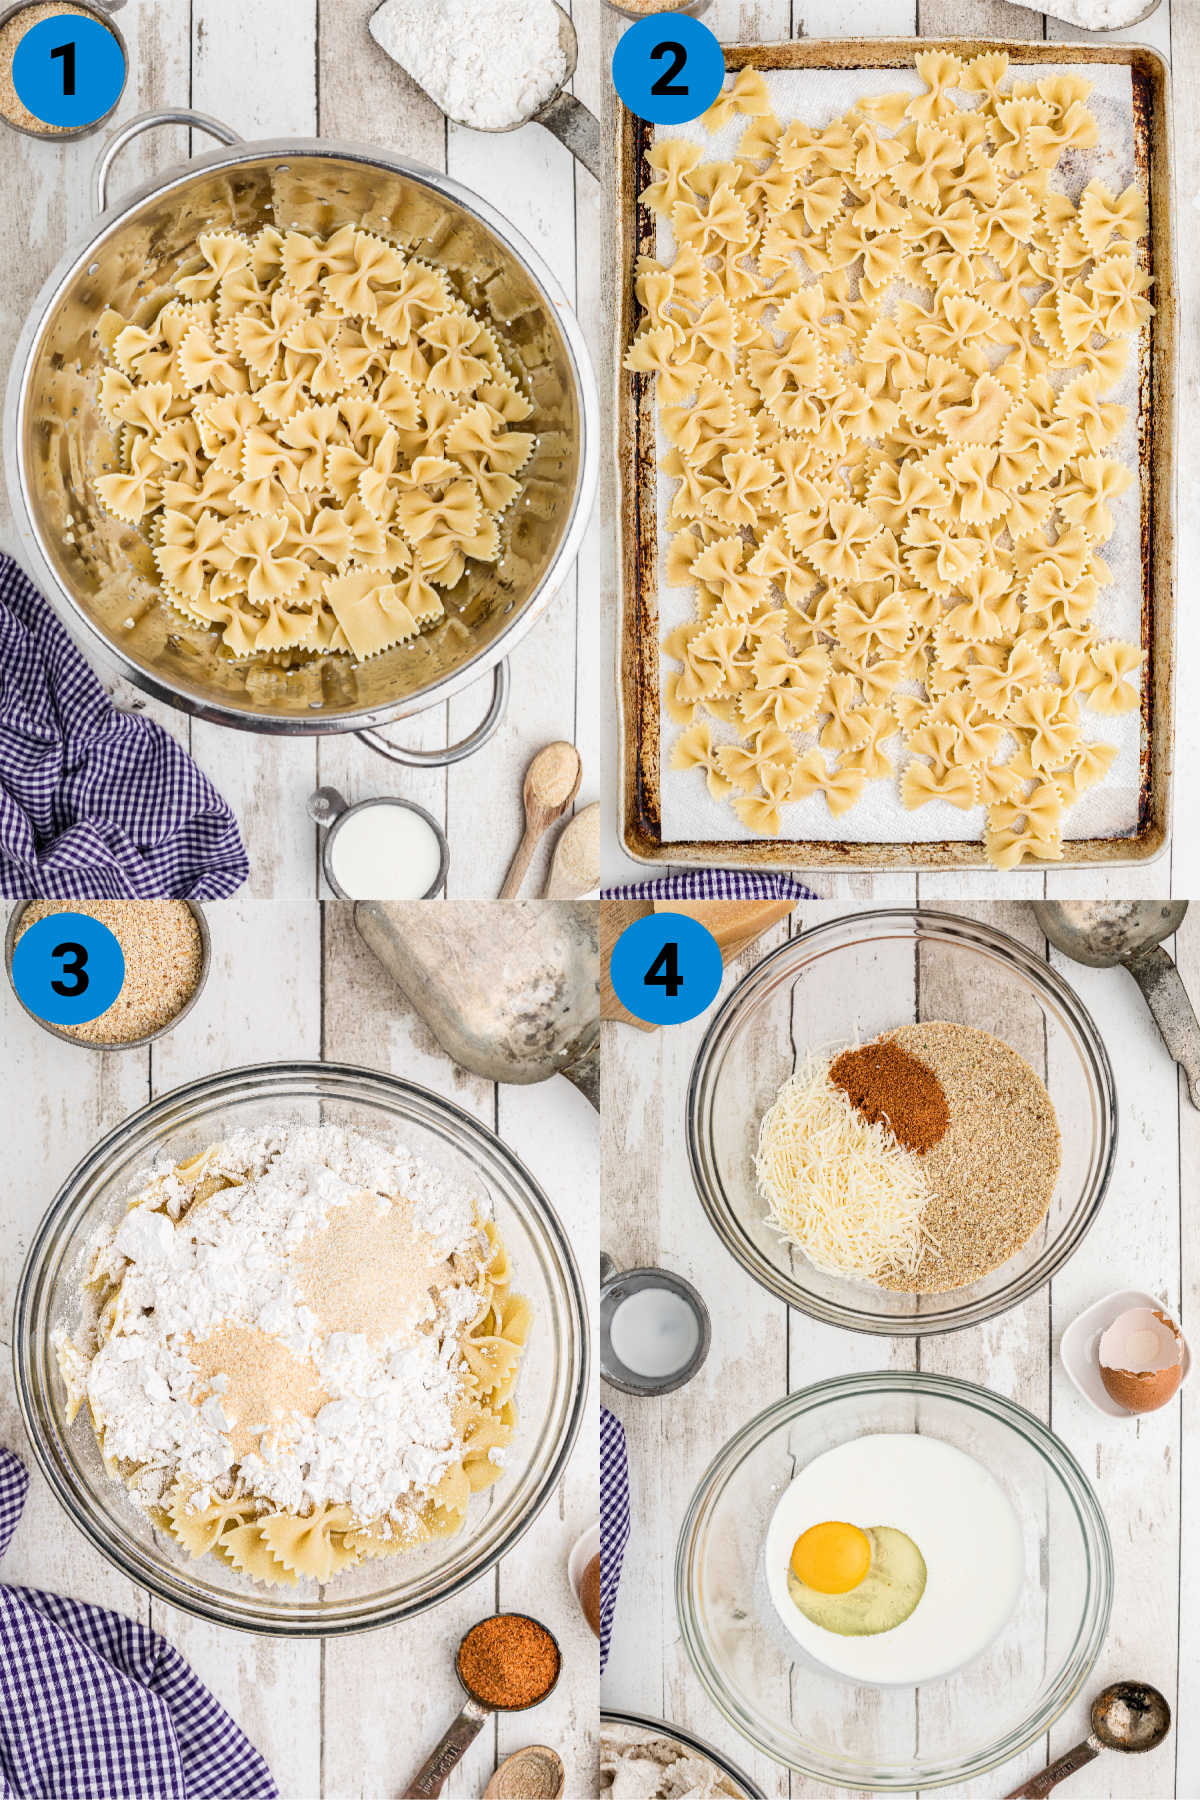 four images showing the recipe steps to make fried bowtie pasta